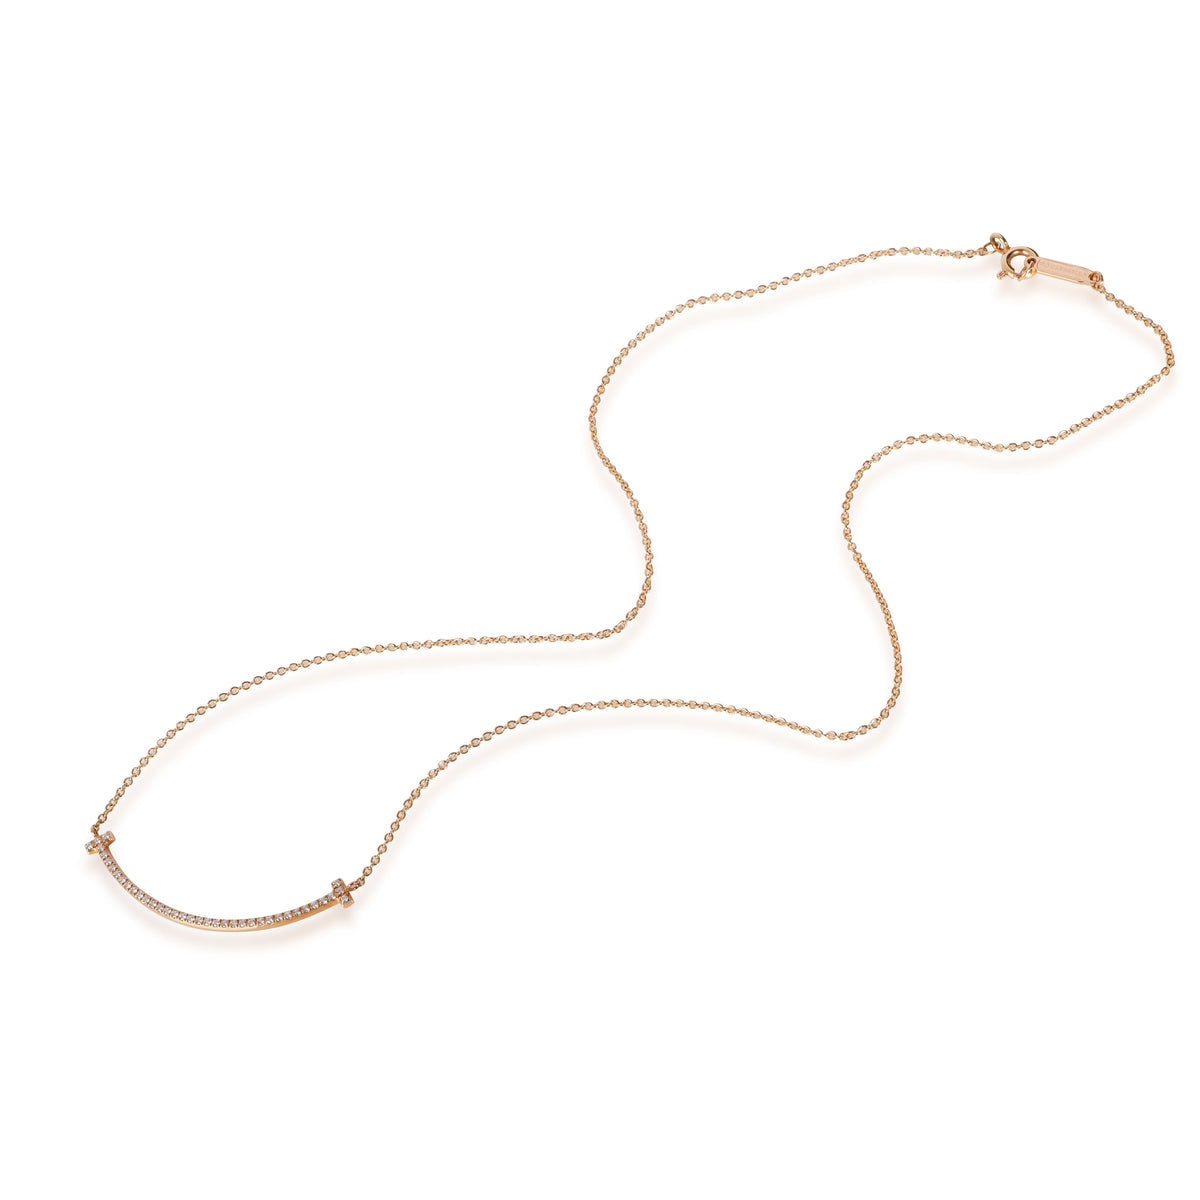 Tiffany & Co. T Smile Diamond Necklace in 18K Rose Gold 0.10 CTW